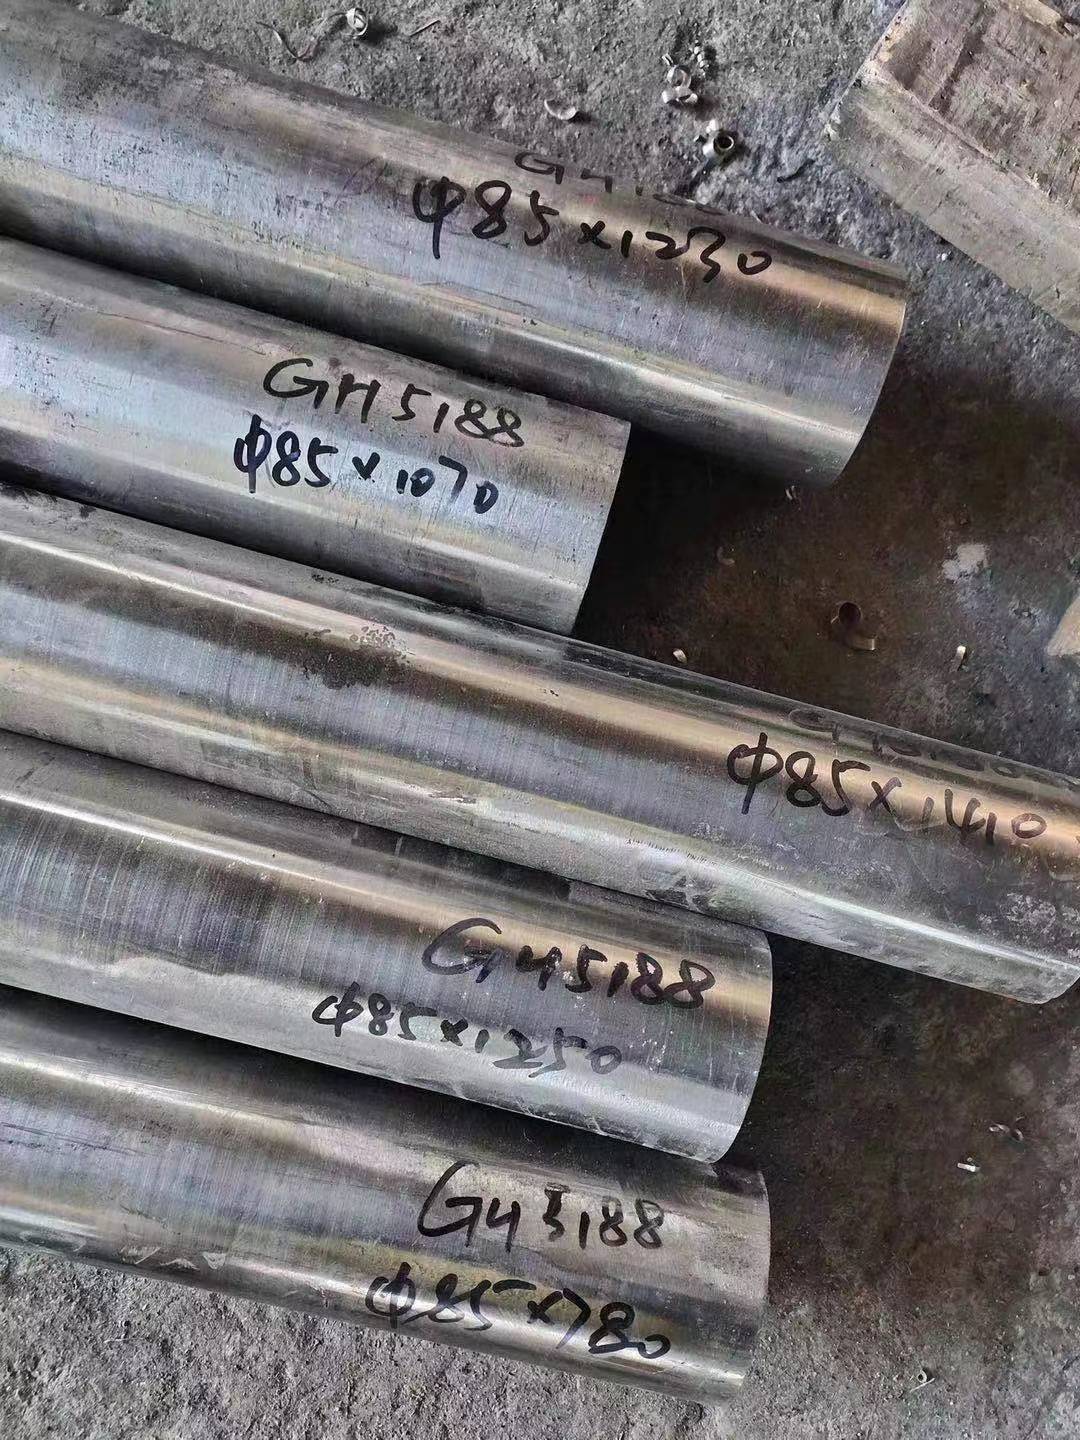 Hastelloy188 Alloy188 Gh5188/Gh188 Uns R30188 Haynes No. 188/Ha188 Alloy Tube/Pipe Featured Image